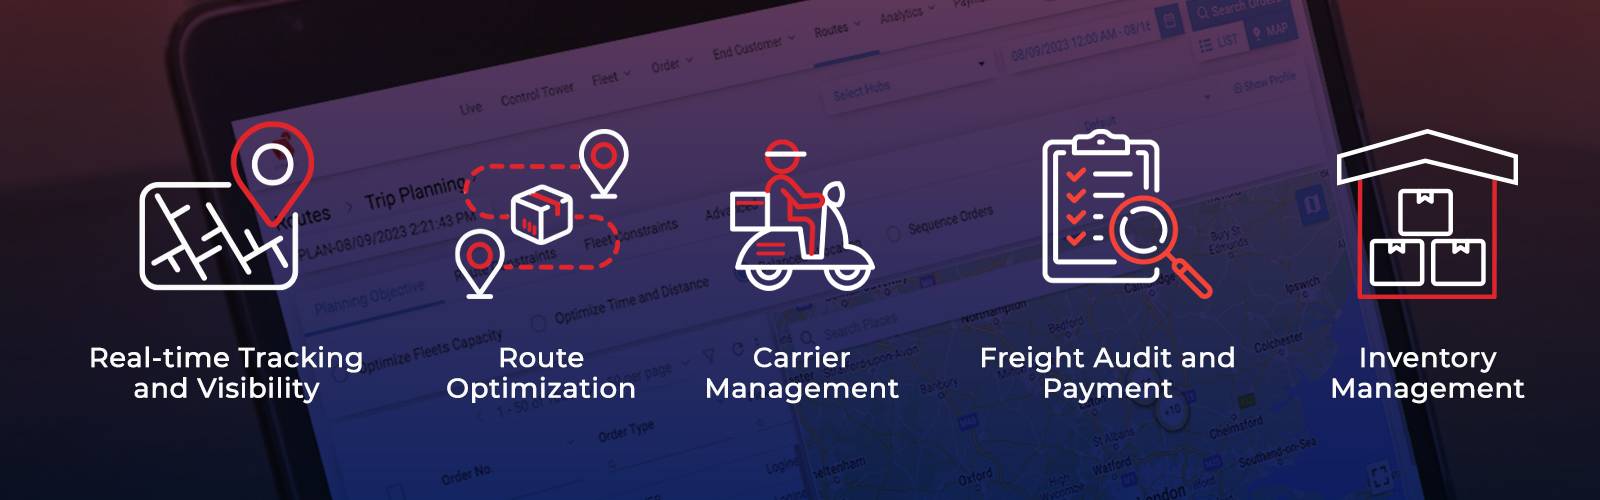 Key features in Transportation management system